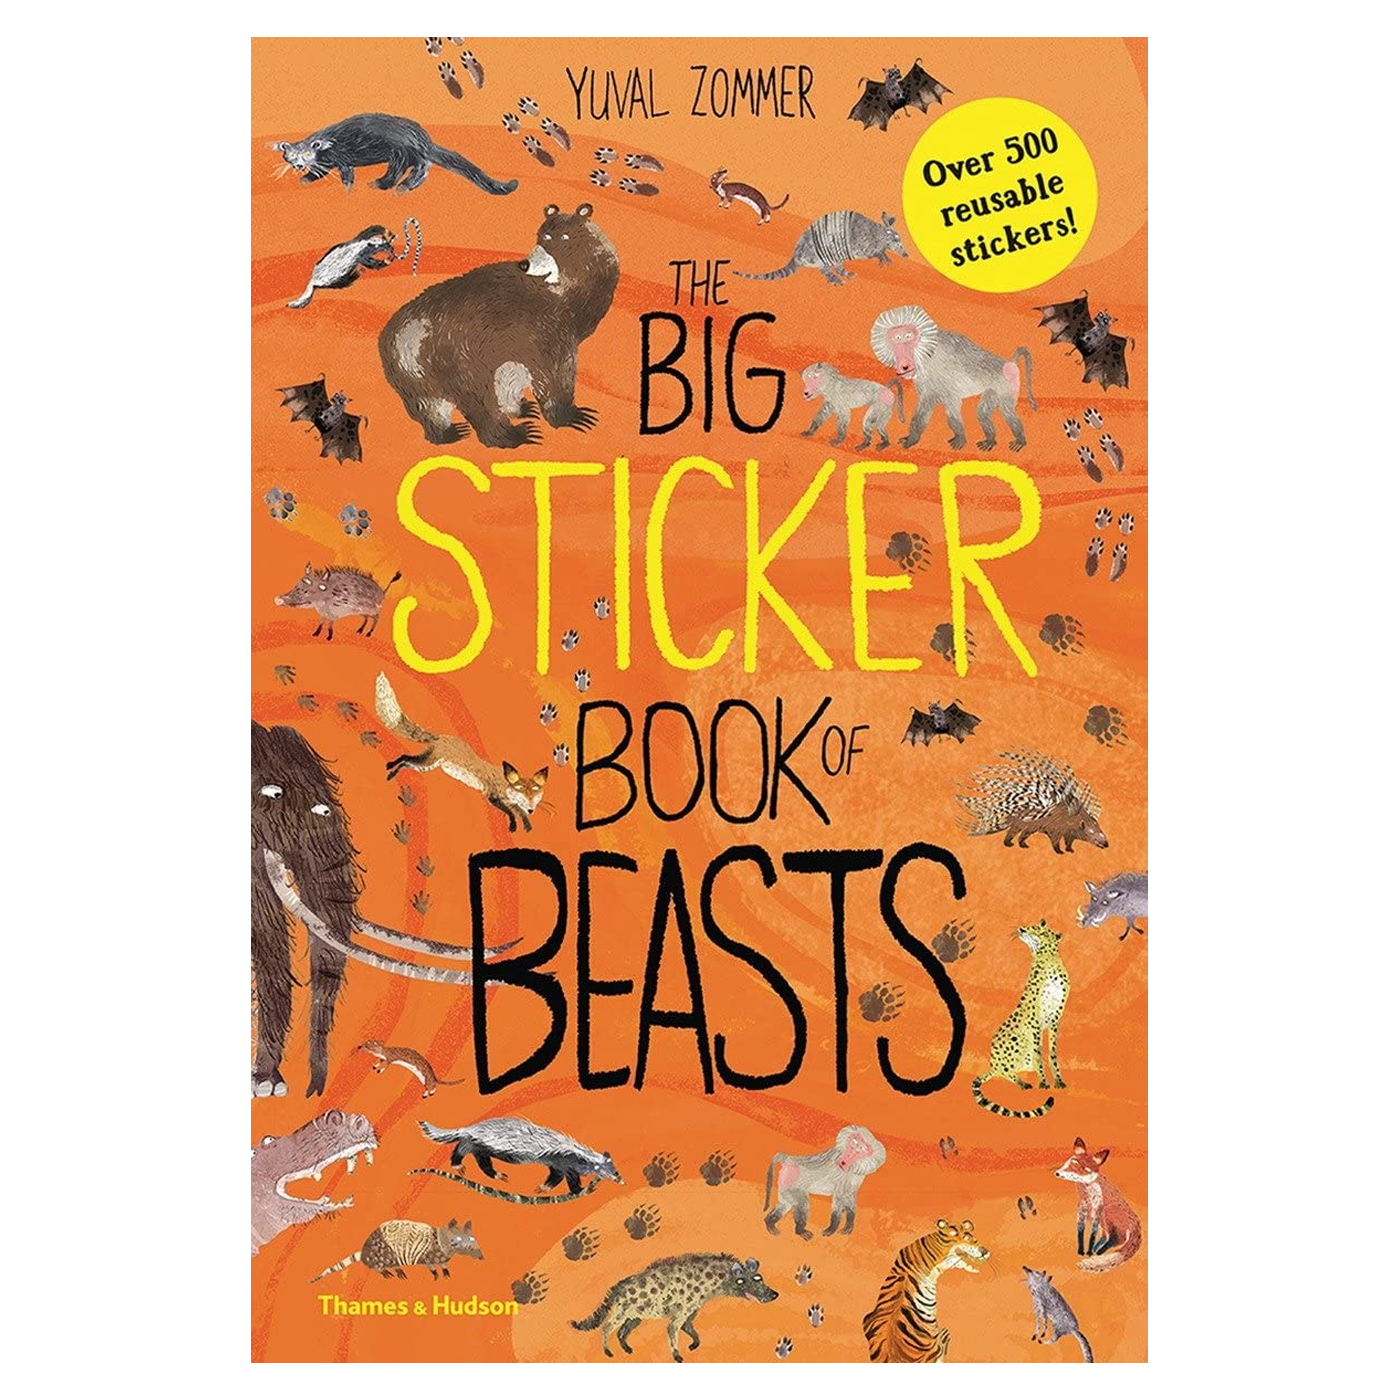 THAMES & HUDSON The Big Sticker Book of Beasts